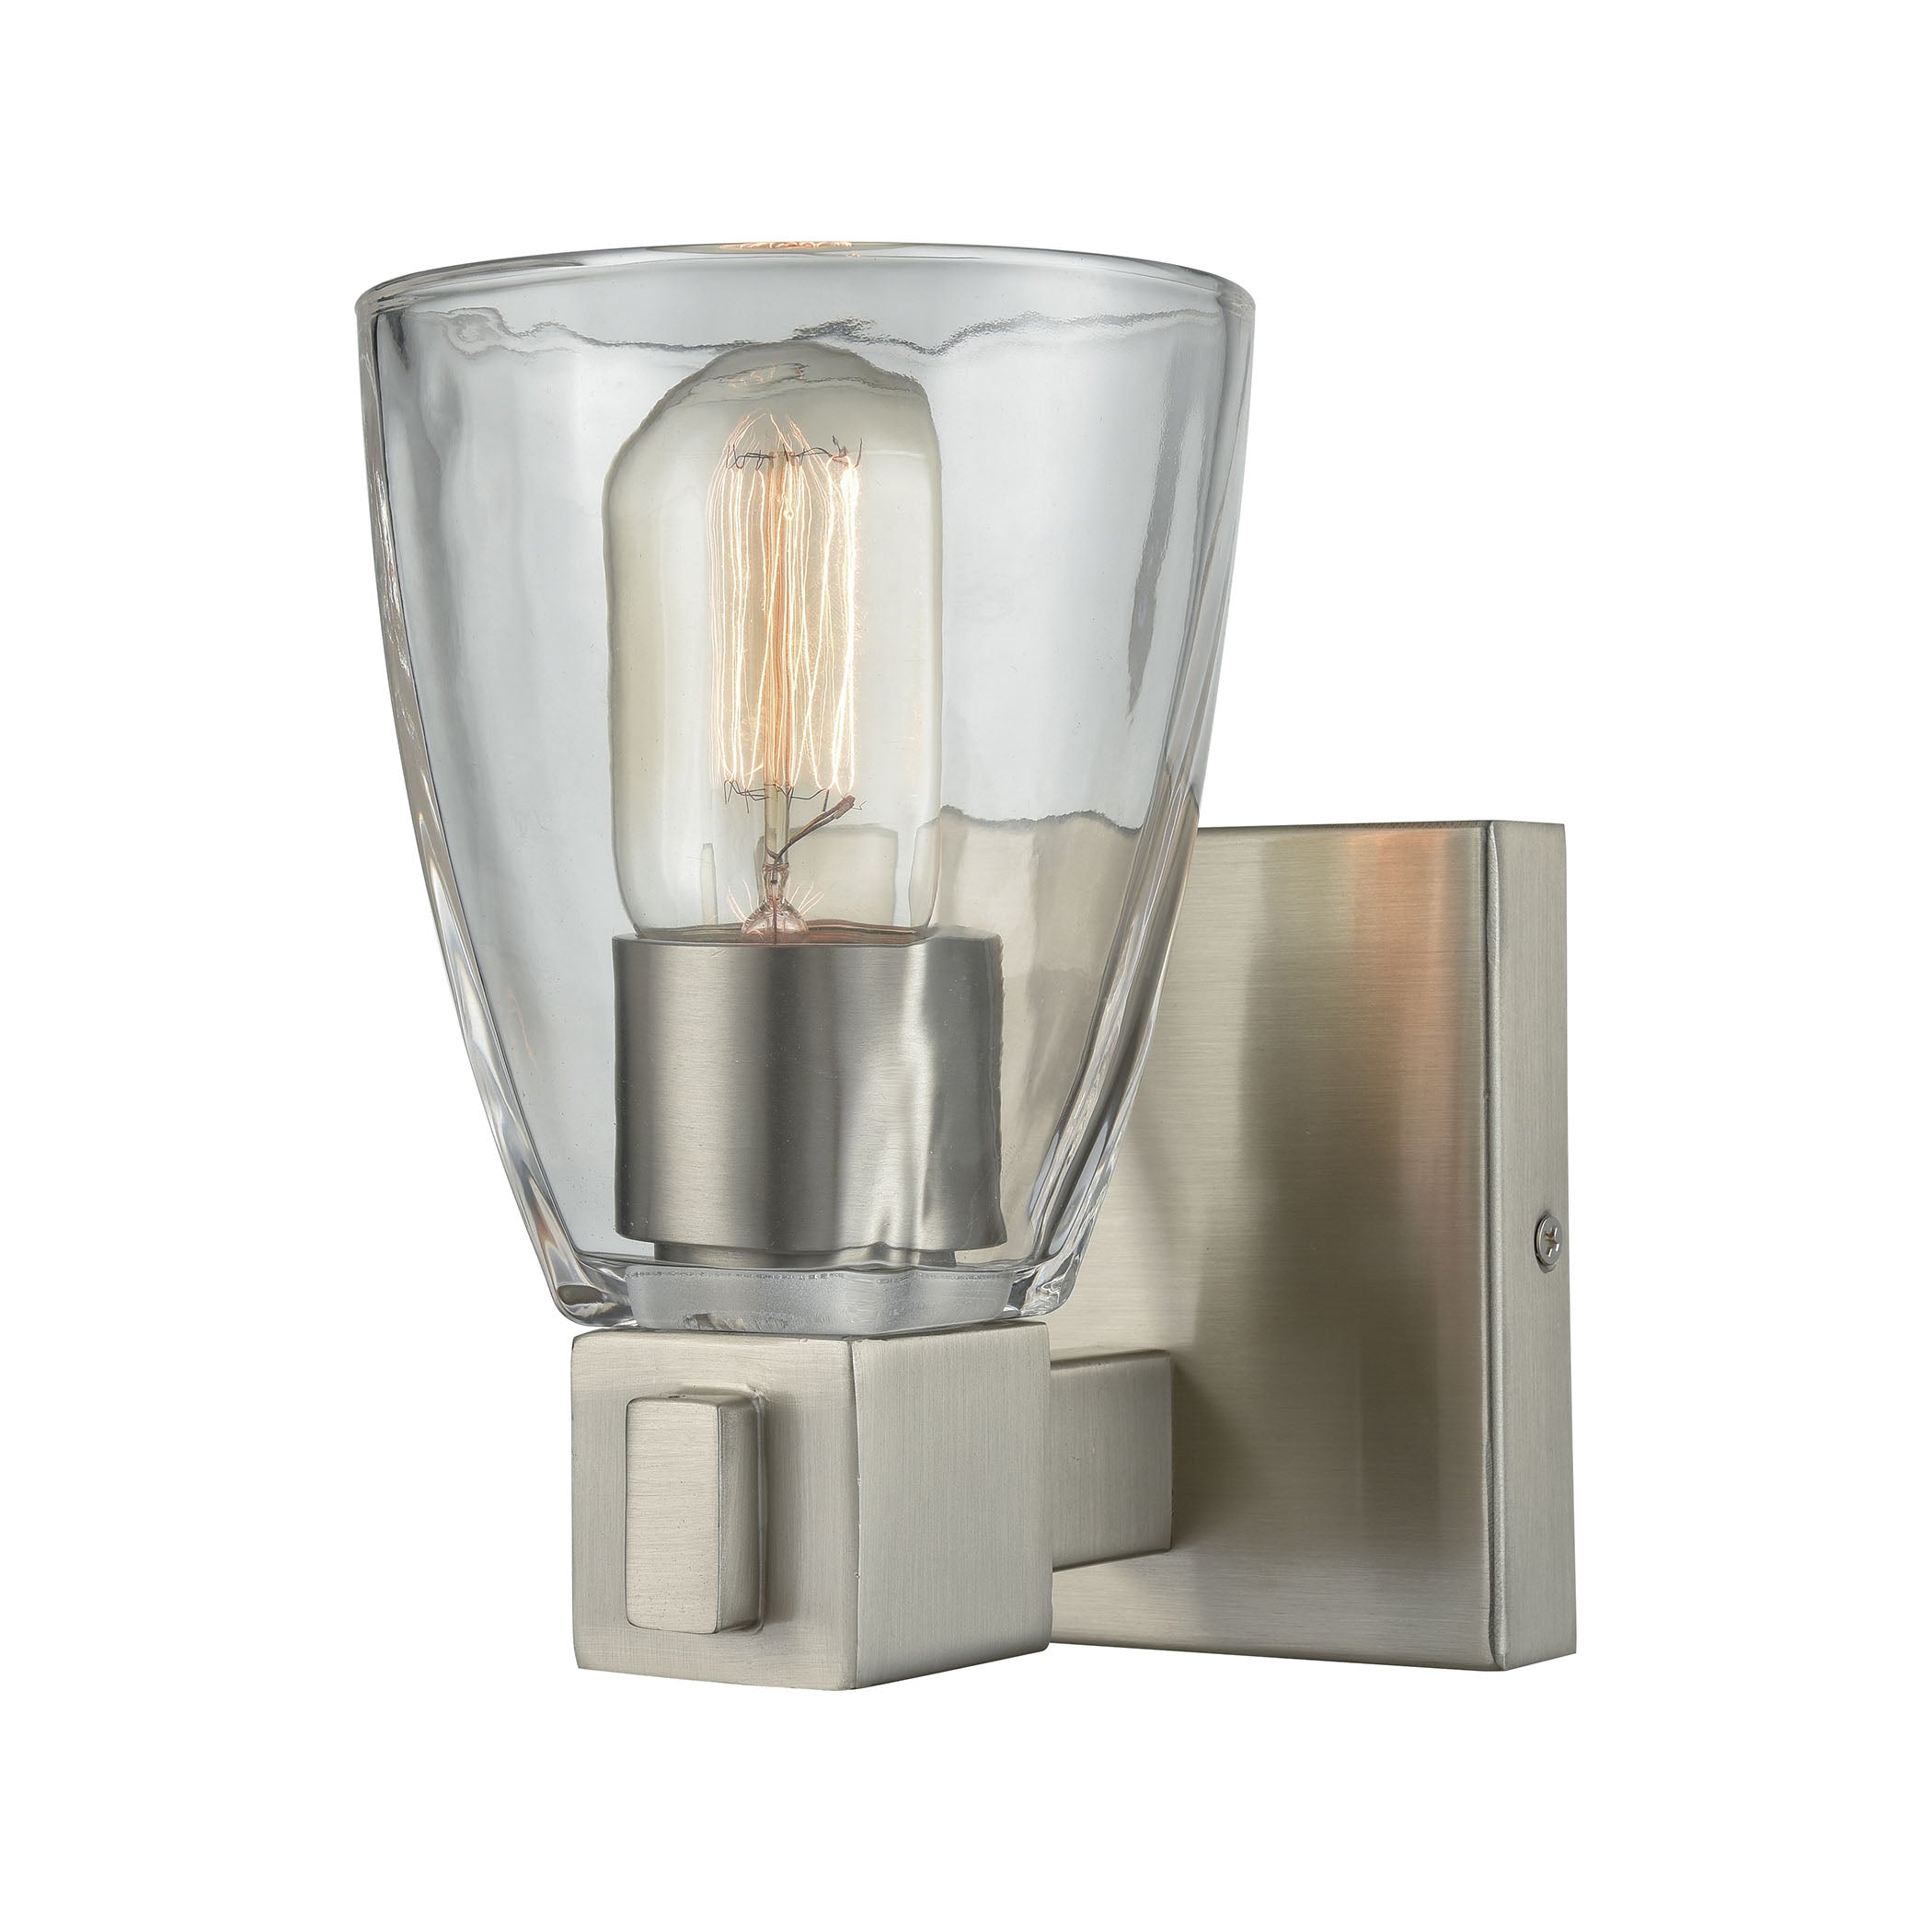 ELK Lighting 11980/1 Ensley 1-Light Vanity Lamp in Satin Nickel with Square-to-Round Clear Glass